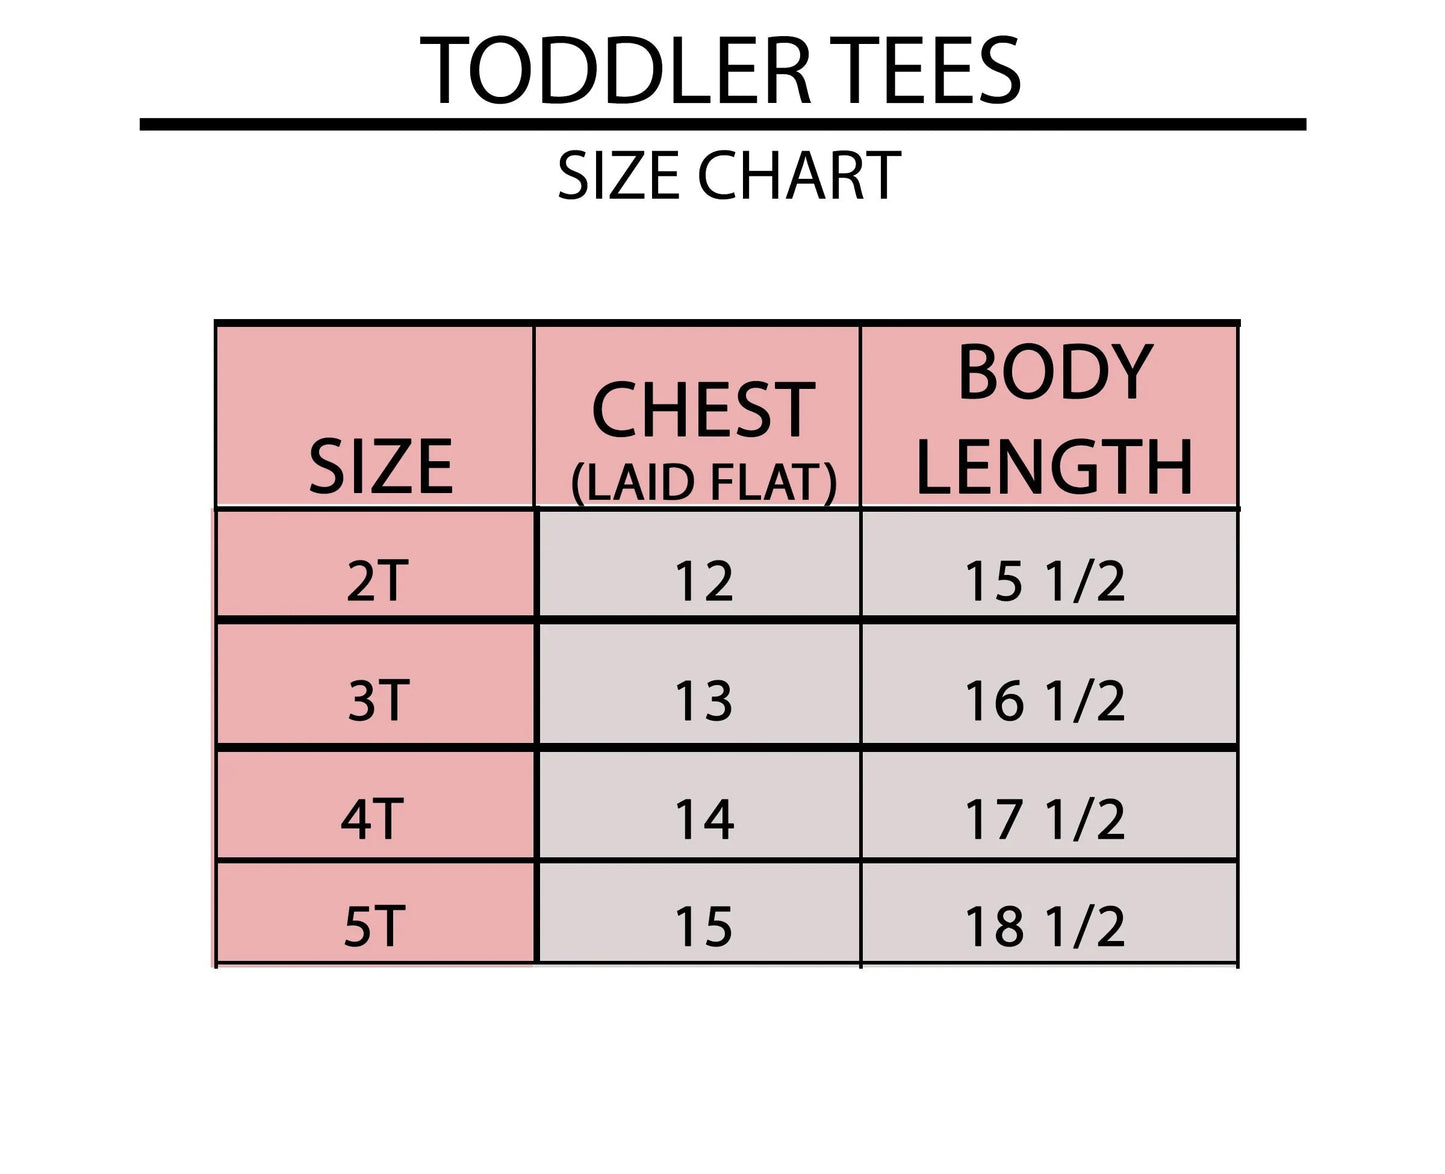 Made In America Liberty | Toddler Short Sleeve Crew Neck